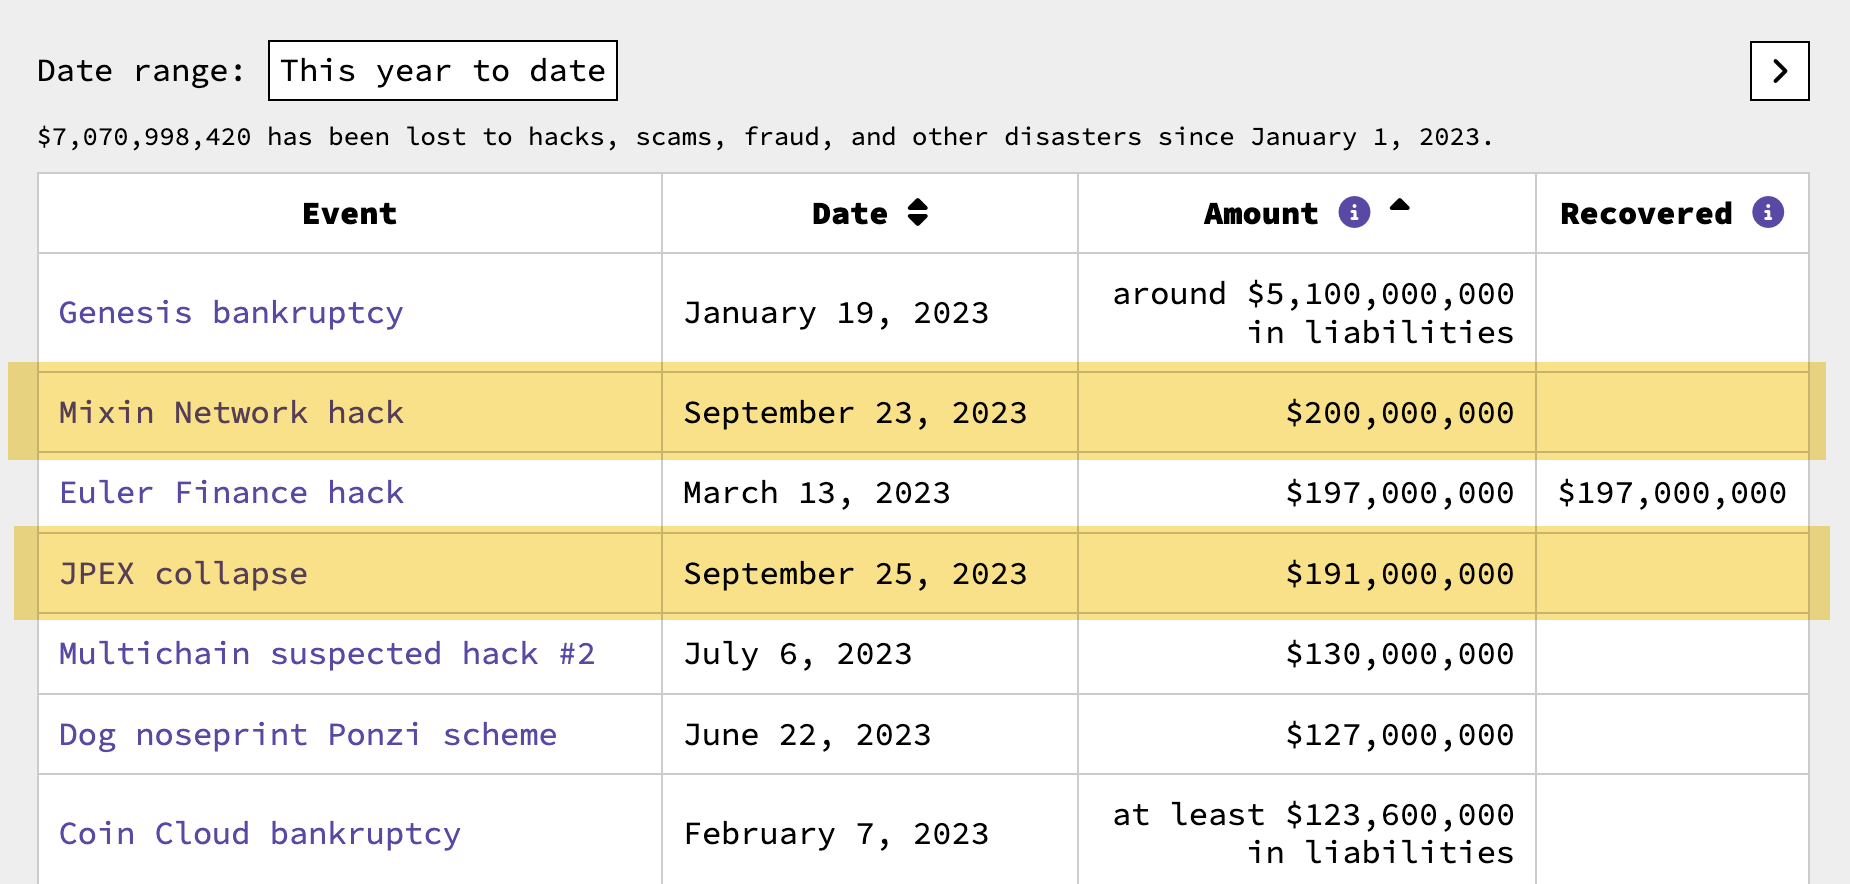 Date range:This year to date  $7,070,998,420 has been lost to hacks, scams, fraud, and other disasters since January 1, 2023. Event	Date Sort table by amount, descending	Amount More info Sort table by amount, ascending	Recovered More info Genesis bankruptcy	January 19, 2023	around $5,100,000,000 in liabilities	 Mixin Network hack	September 23, 2023	$200,000,000	 Euler Finance hack	March 13, 2023	$197,000,000	$197,000,000 JPEX collapse	September 25, 2023	$191,000,000	 Multichain suspected hack #2	July 6, 2023	$130,000,000	 Dog noseprint Ponzi scheme	June 22, 2023	$127,000,000	 Coin Cloud bankruptcy	February 7, 2023	at least $123,600,000 in liabilities	